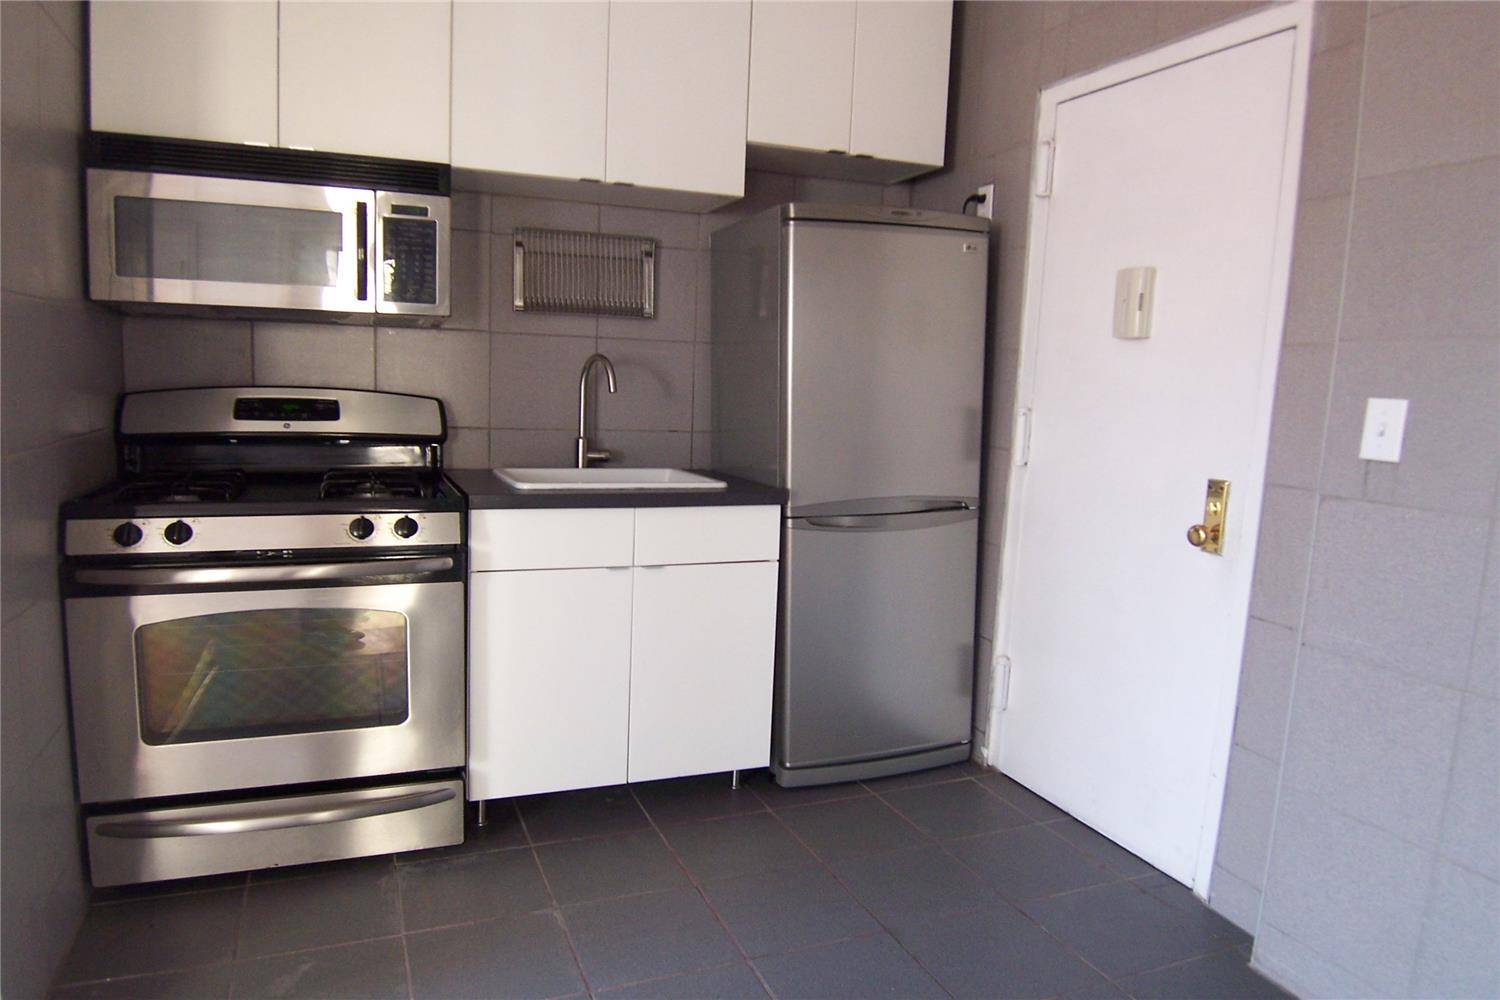 This fully renovated spacious Two Bedroom apartment located in the corner of Mulberry and Broome Street.